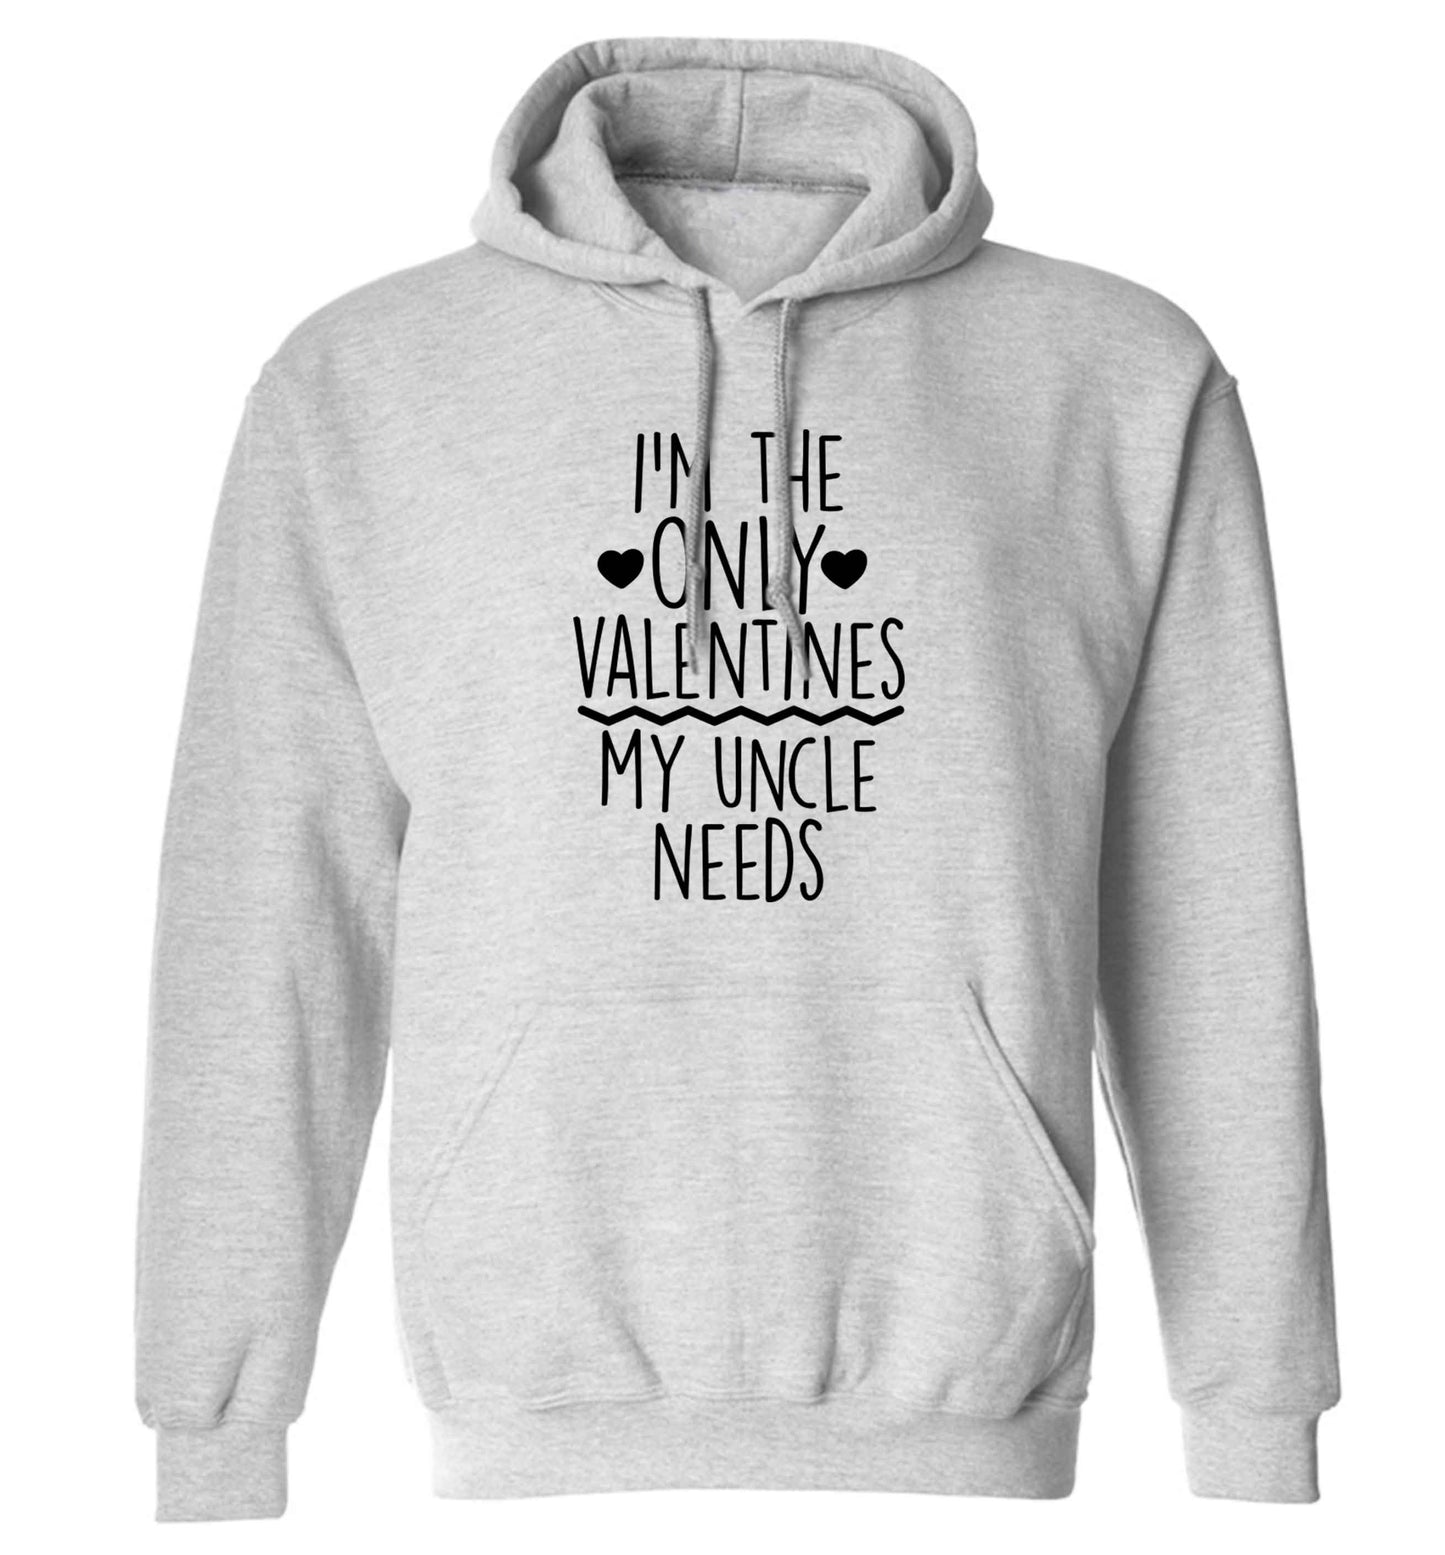 I'm the only valentines my uncle needs adults unisex grey hoodie 2XL